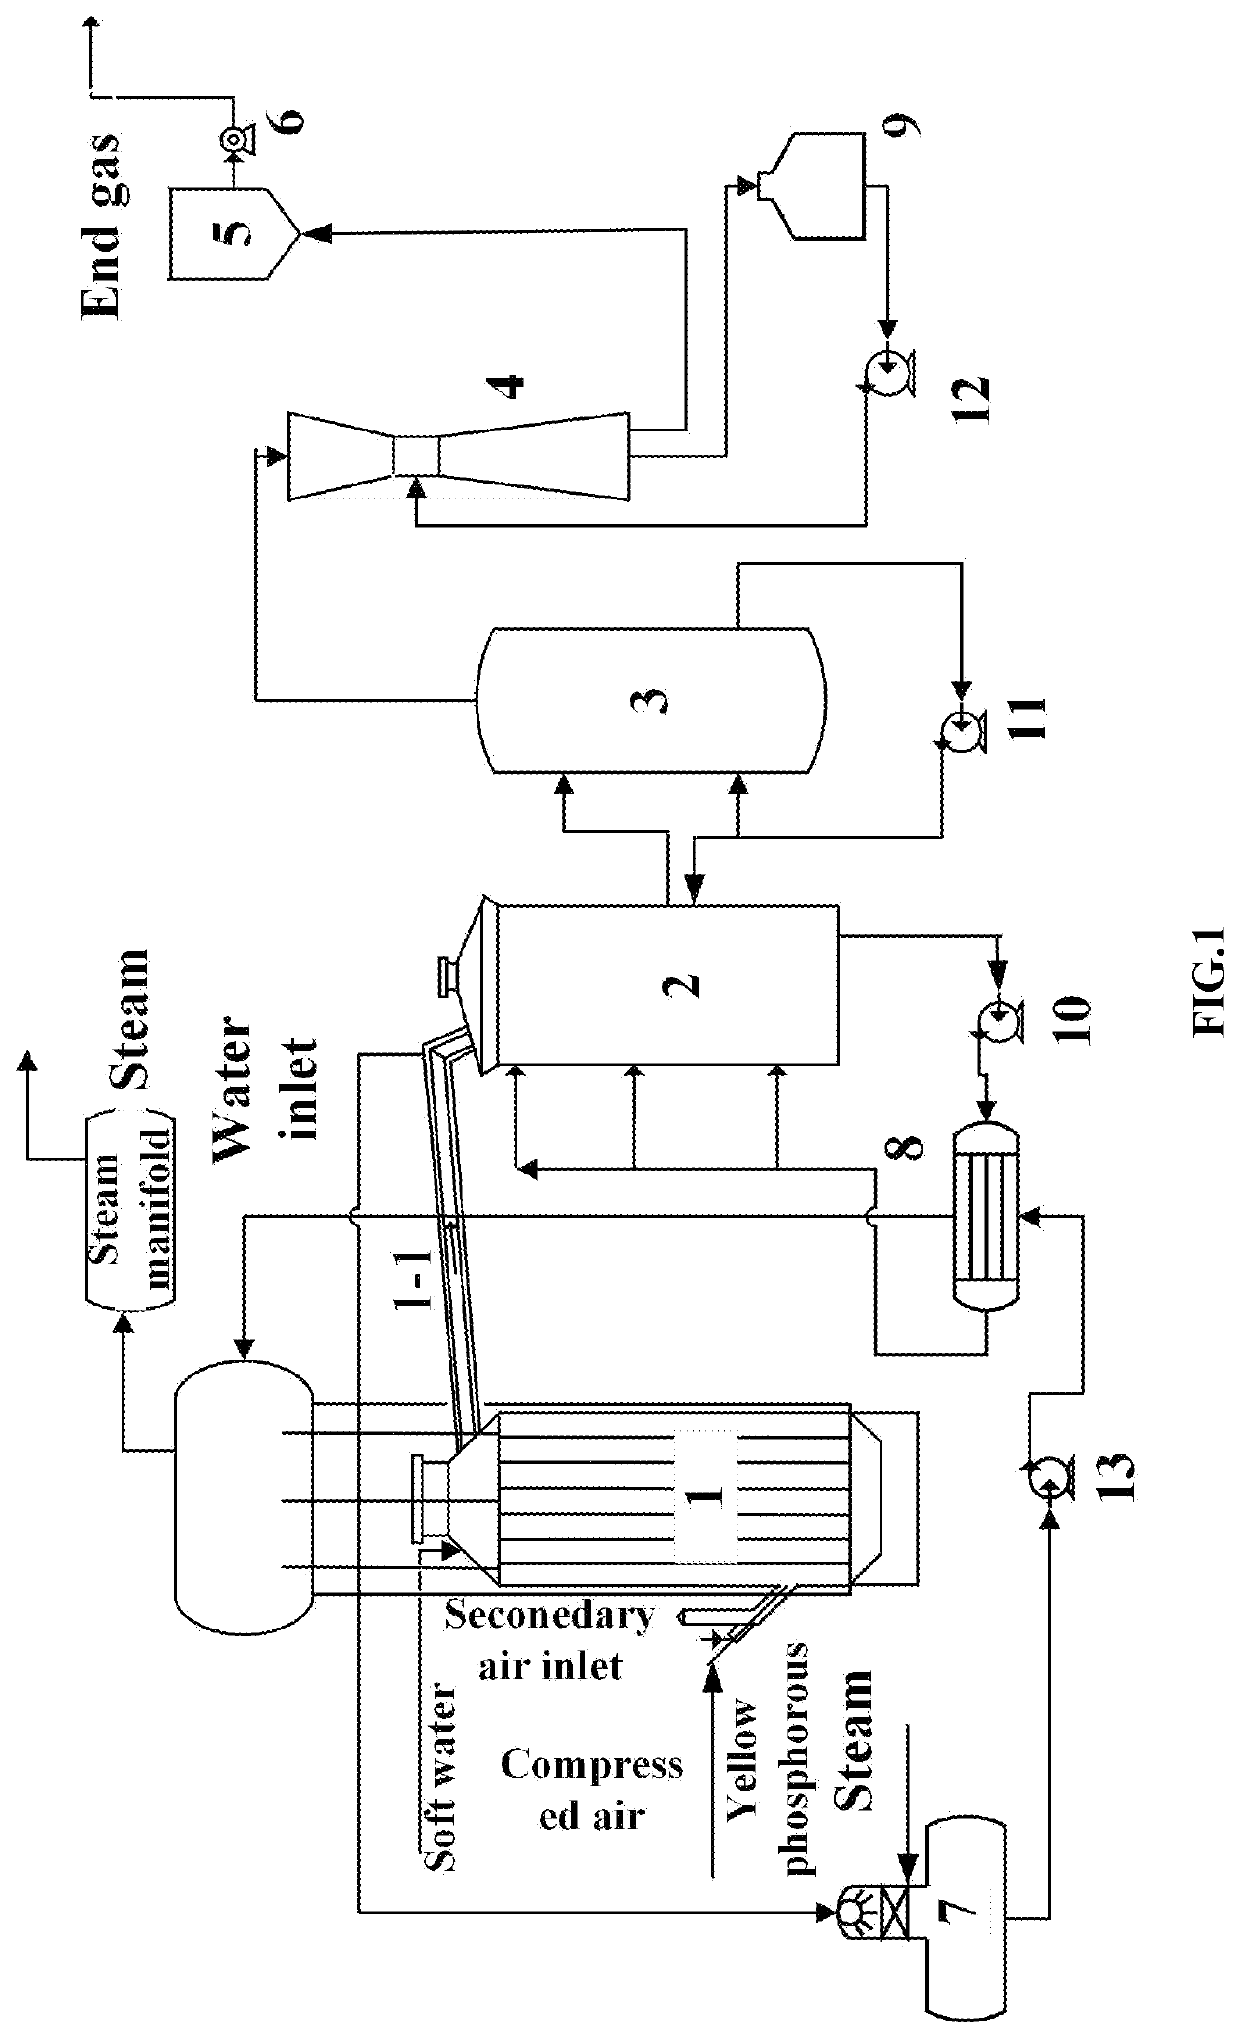 Total Heat Energy Recovery System For Furnace-Process Phosphoric Acid